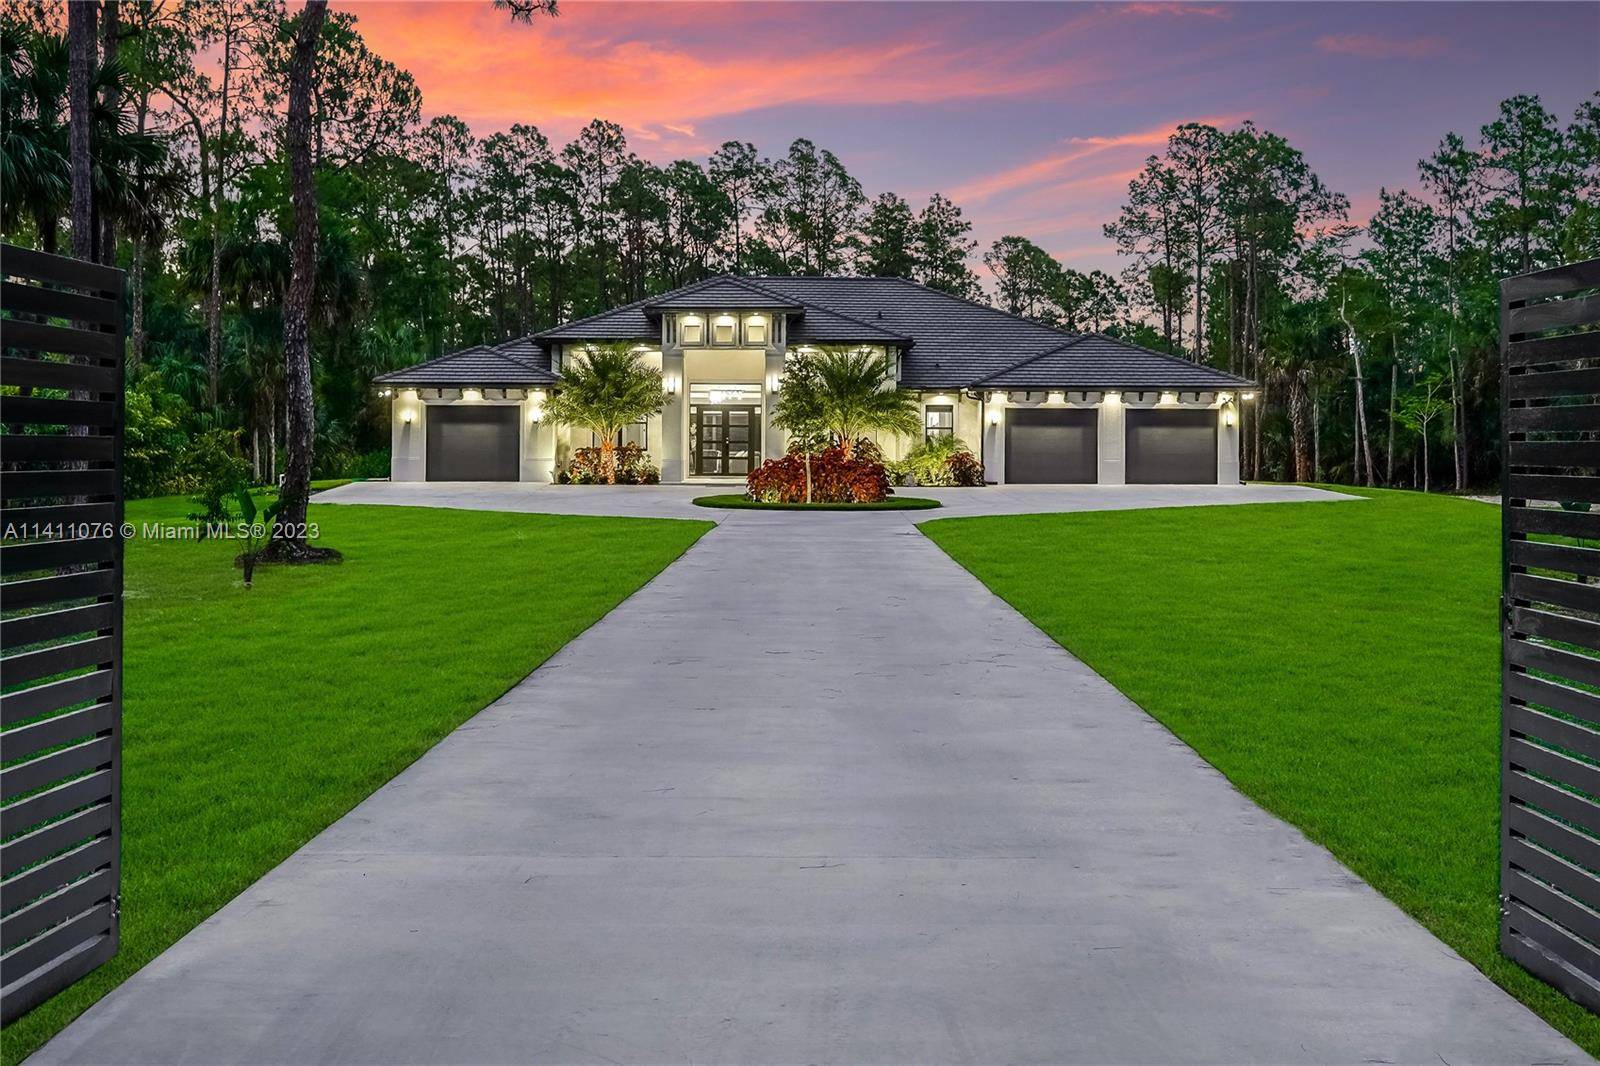 This property offers luxury, privacy, and ample space for entertaining.